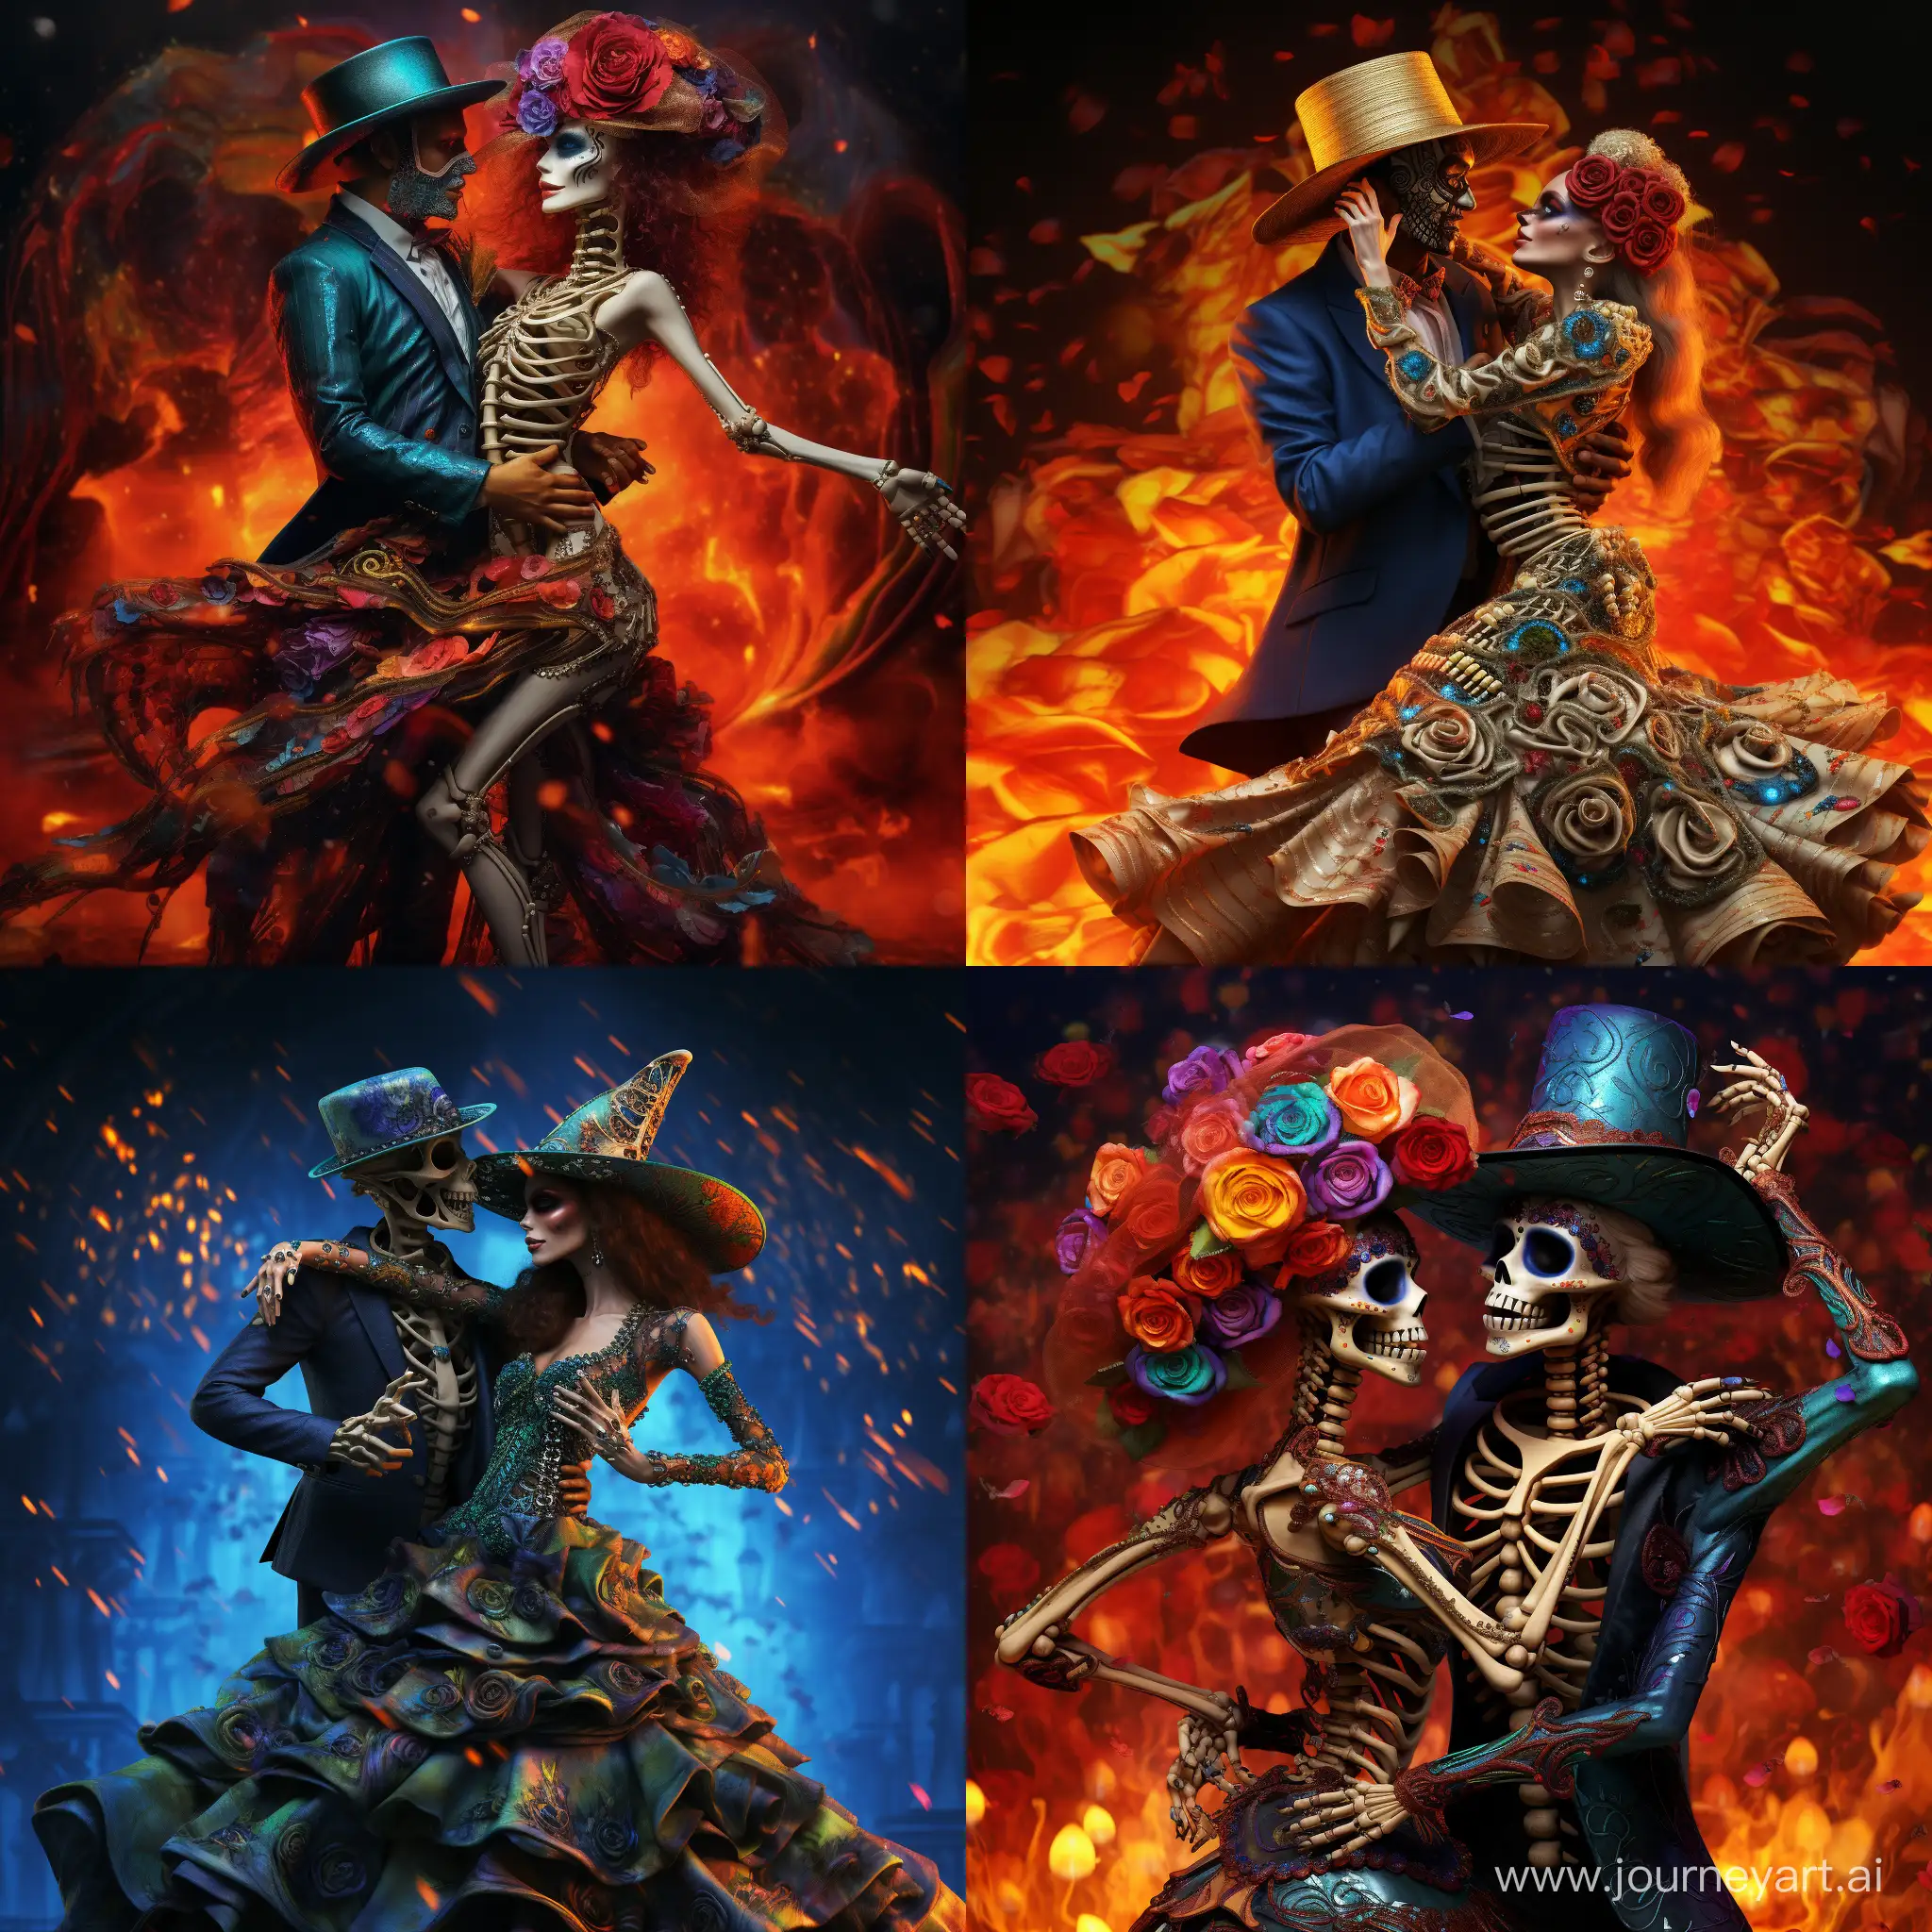 photorealistic final render of an epic full body of two skeletons, a male and a female, dancing, with the male wearing a suit and tophat on fire, and the female wearing formal hair and a burning gown, organic tracery, LSD trip, vivid colors mixed with chiaoscuro, deep colors, glitter, 16k resolution photorealistic, masterpiece, breathtaking intricate details, realistic and lifelike cgi diorama, dramatic natural lighting, reflective catchlights, high quality CGI VFX fine art--ar 2:3 